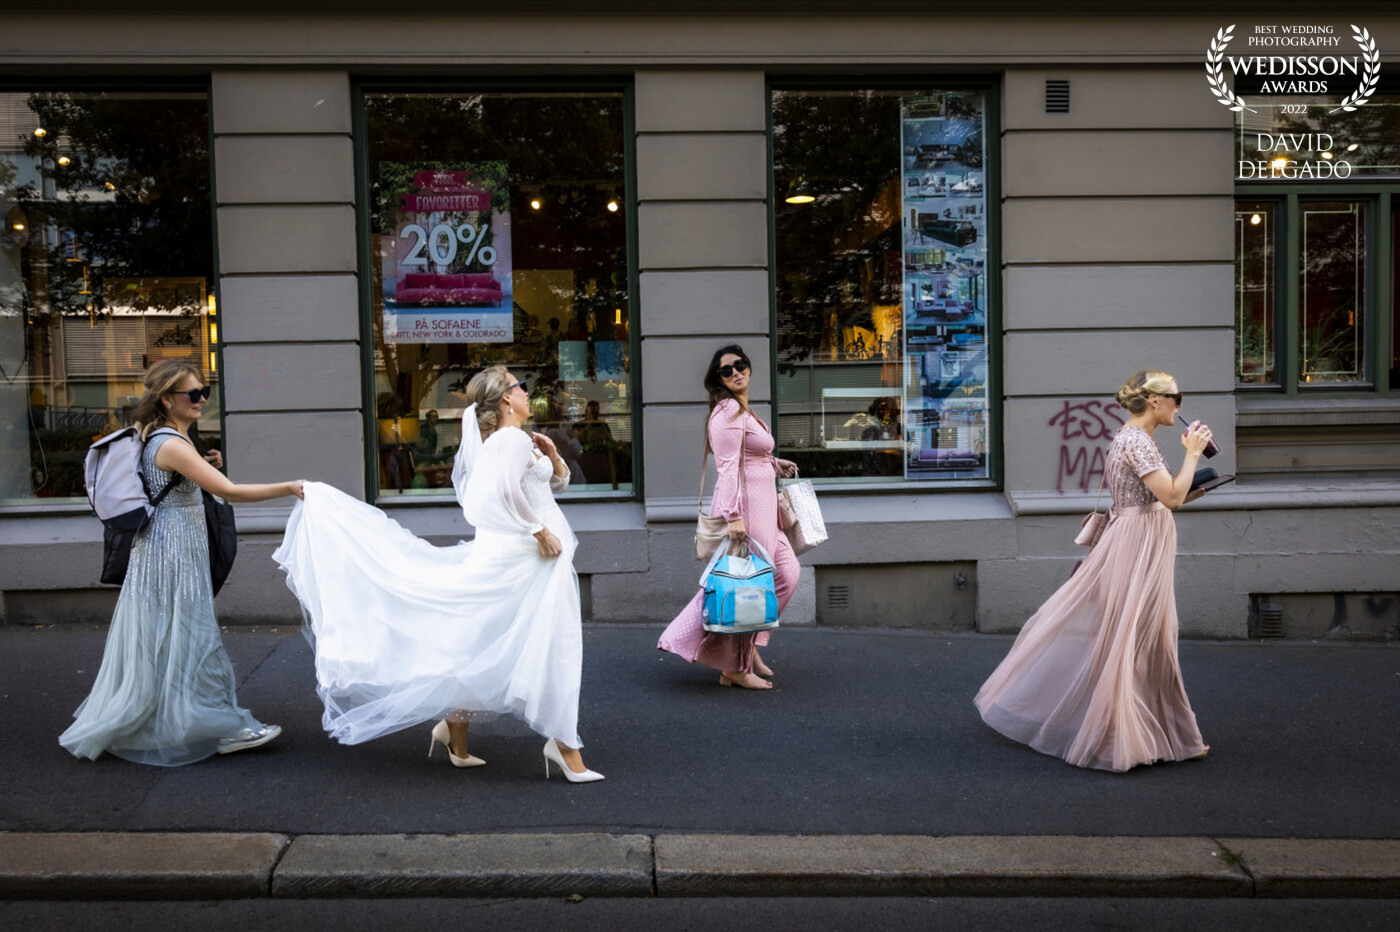 Dear Beauties - Maria and her beautiful friends walking through the streets of Oslo heading to one of the most emblematic parks in the city and meeting her future husband. The first look is waiting!